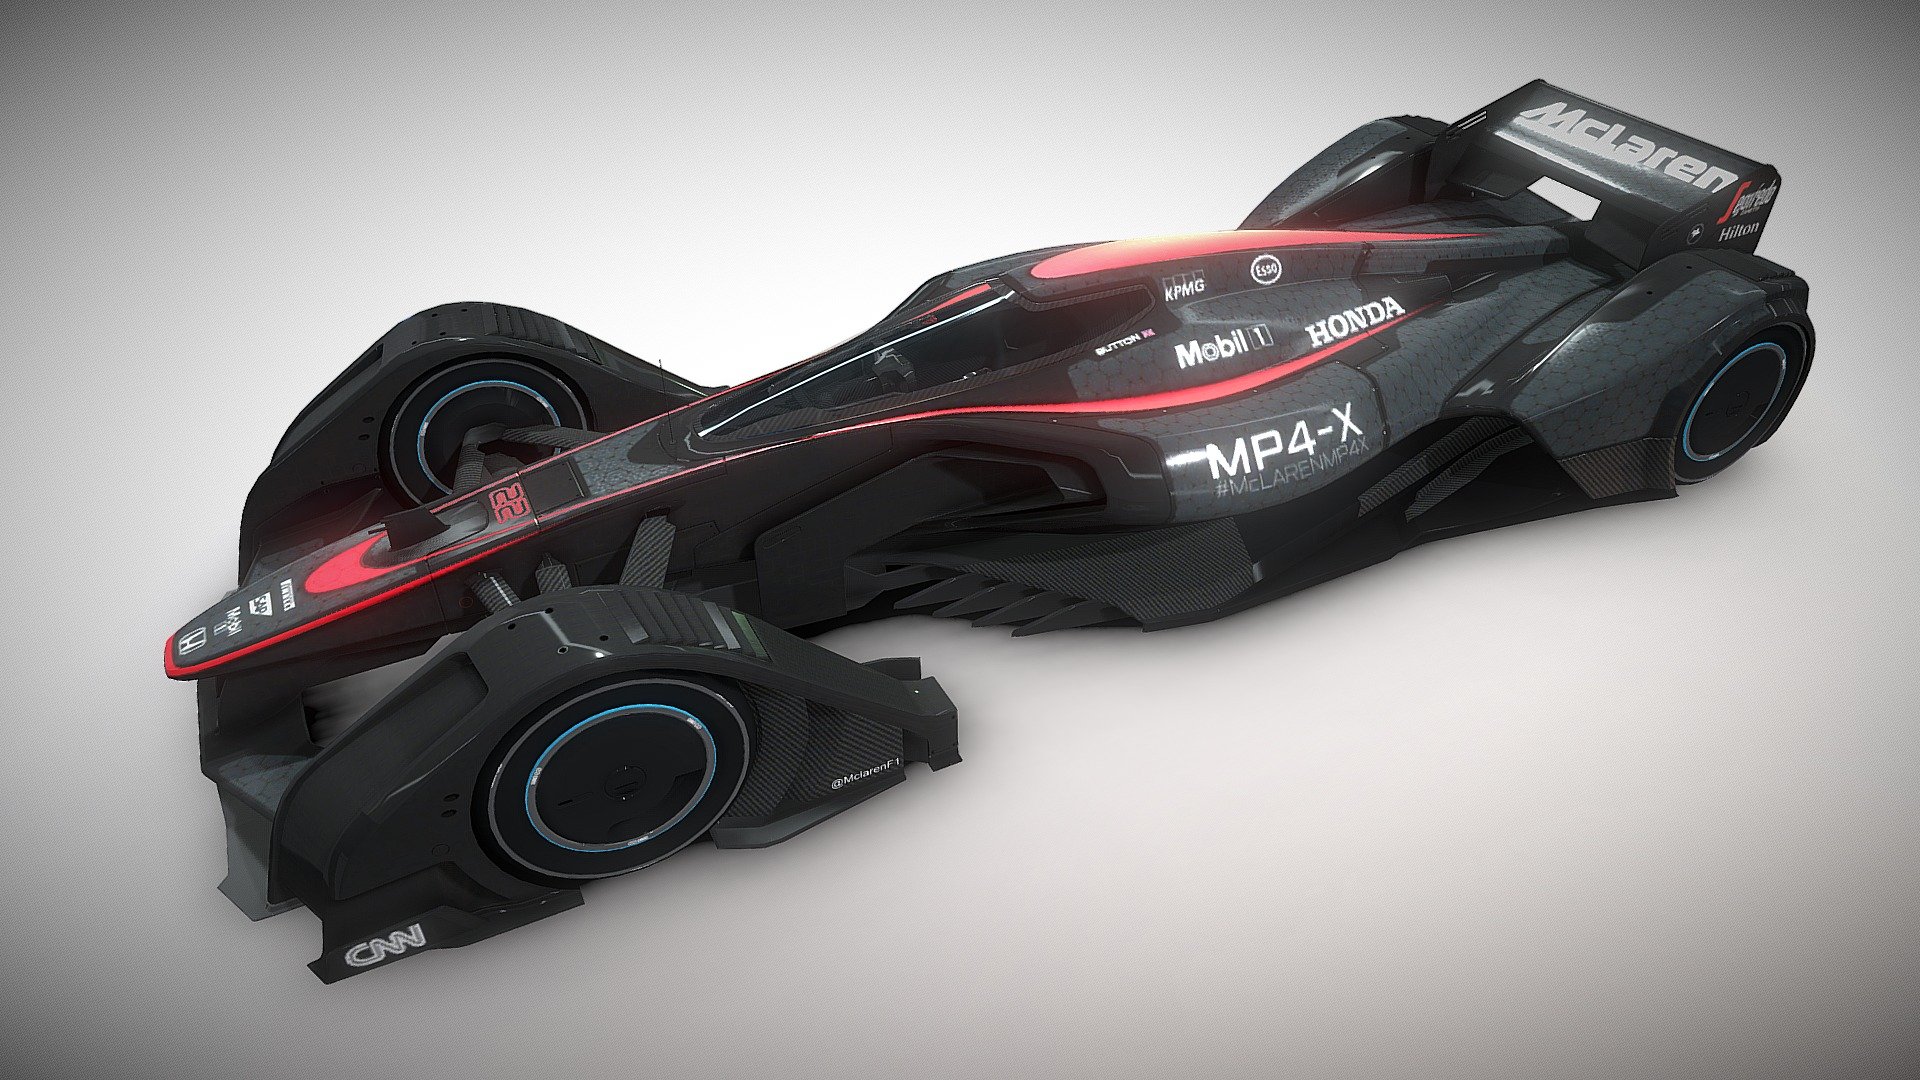 &hellip;
Dont Ask for free downloads, it will never happen!
http://www.mclaren.com/formula1/inside-the-mtc/mclaren-mp4-x/

VR-ready

will be further cleaning the mesh up &amp; re-releasing to be a paid content that includes a unitypackage as well - Maclaren Honda - MP4-X - 3D model by OGL (@GaryLim) 3d model